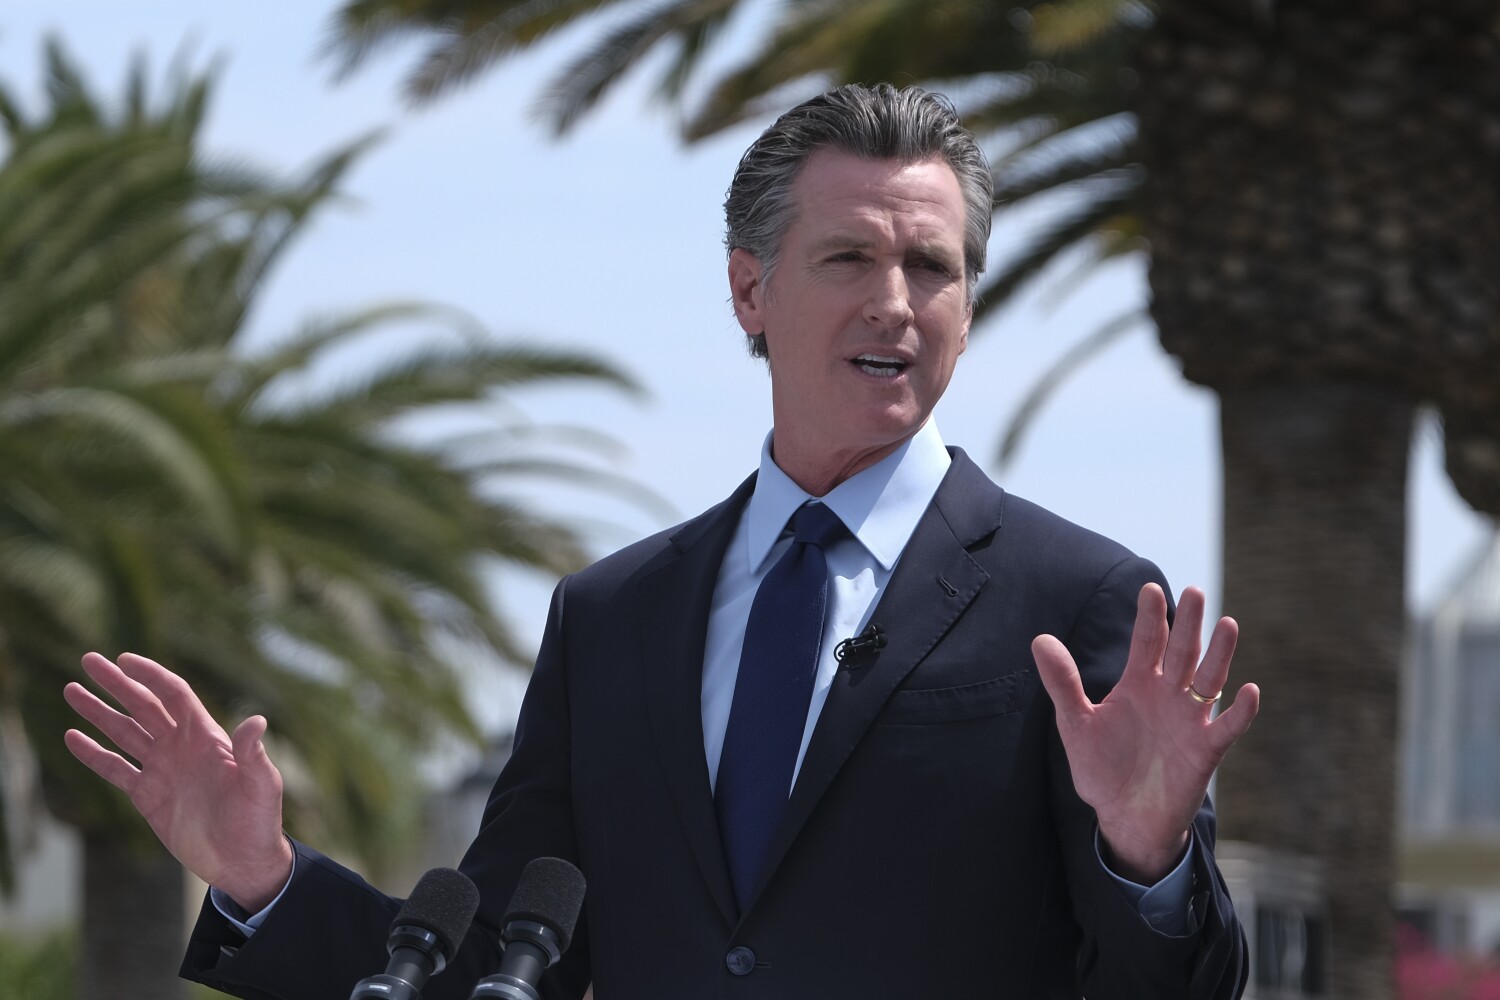 Newsom won't be listed as a Democrat on recall ballot, judge says